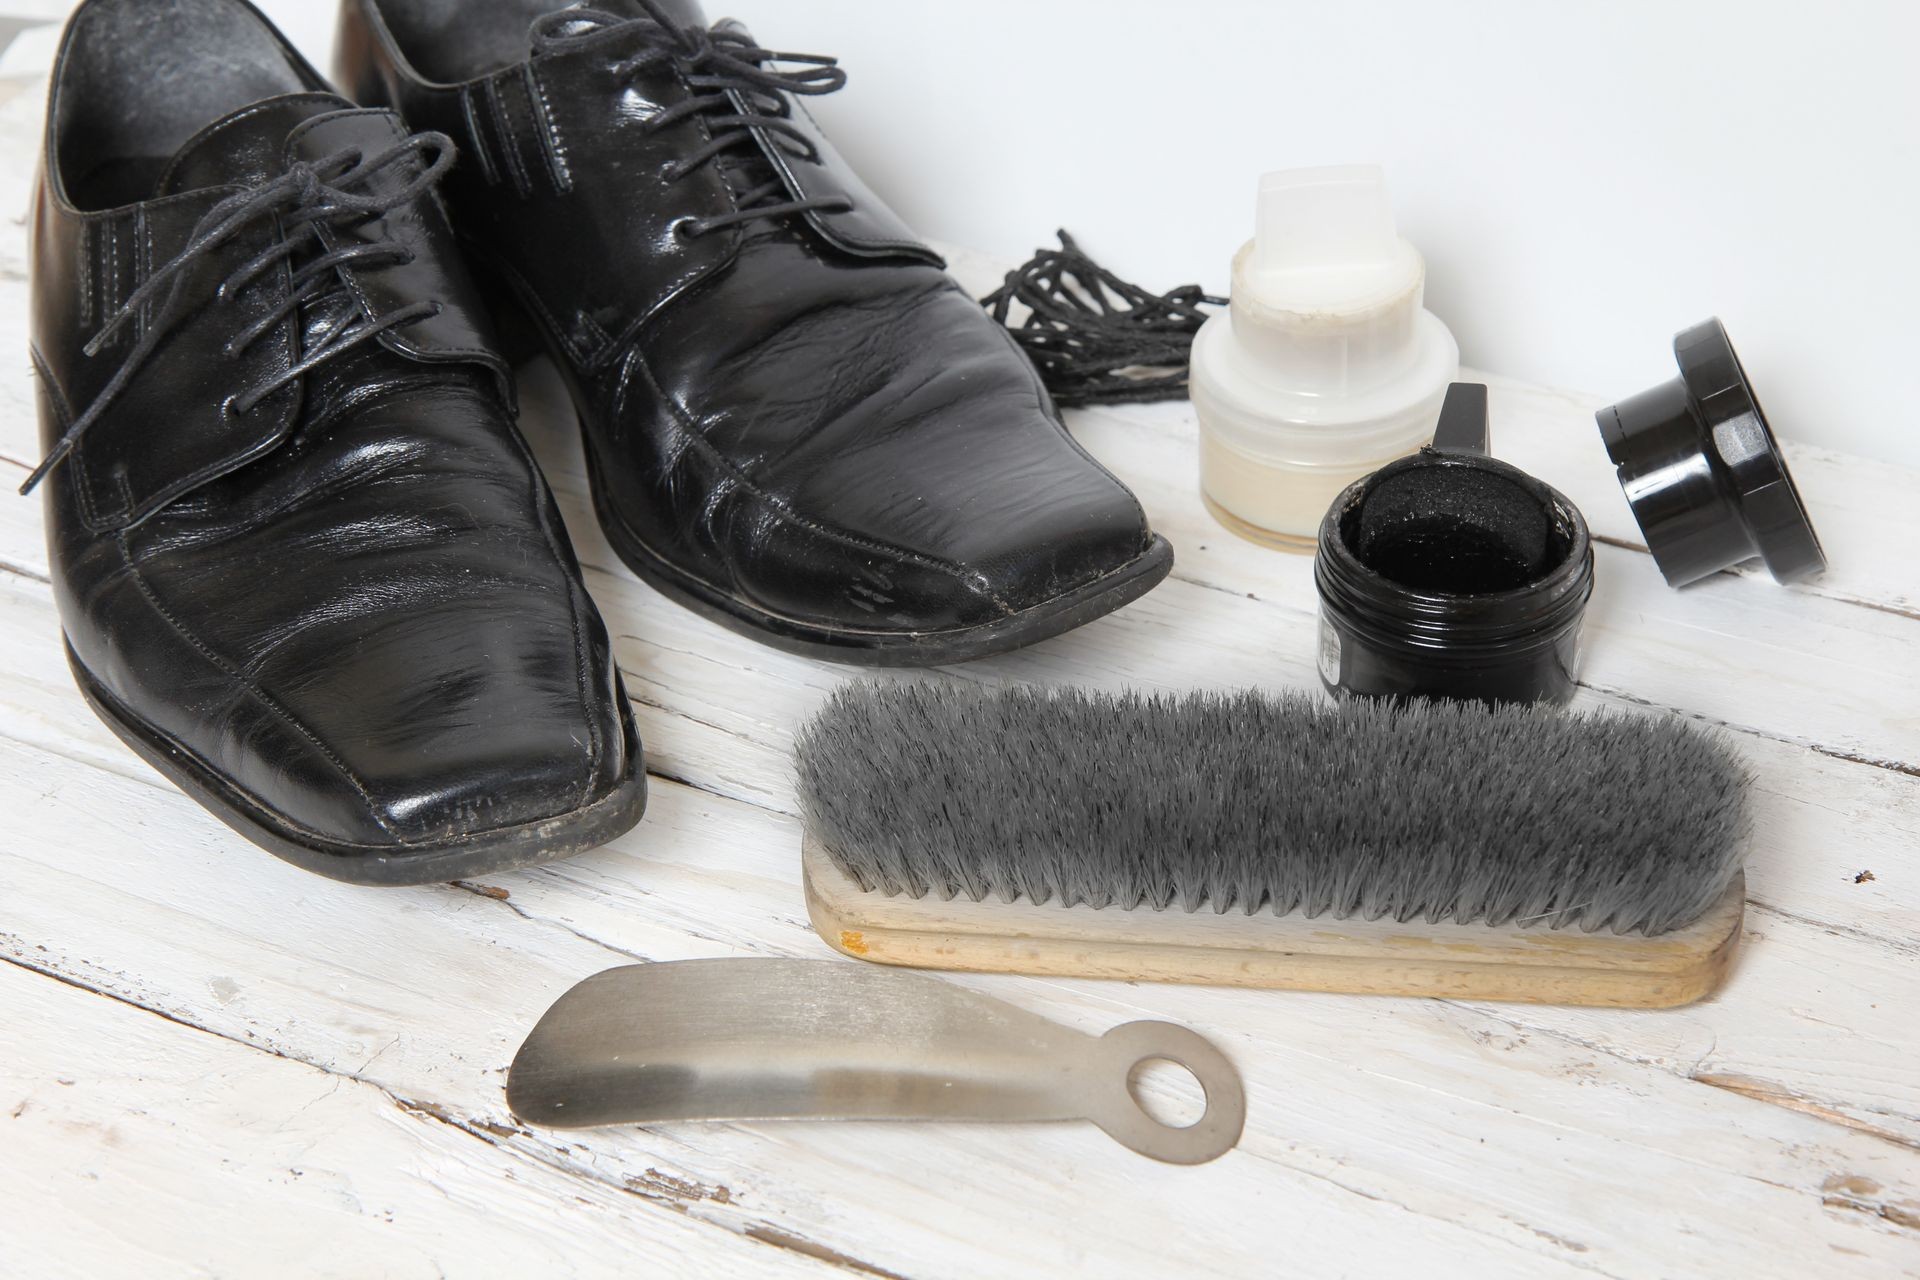 shoe care equipment and formal black shoe on white background